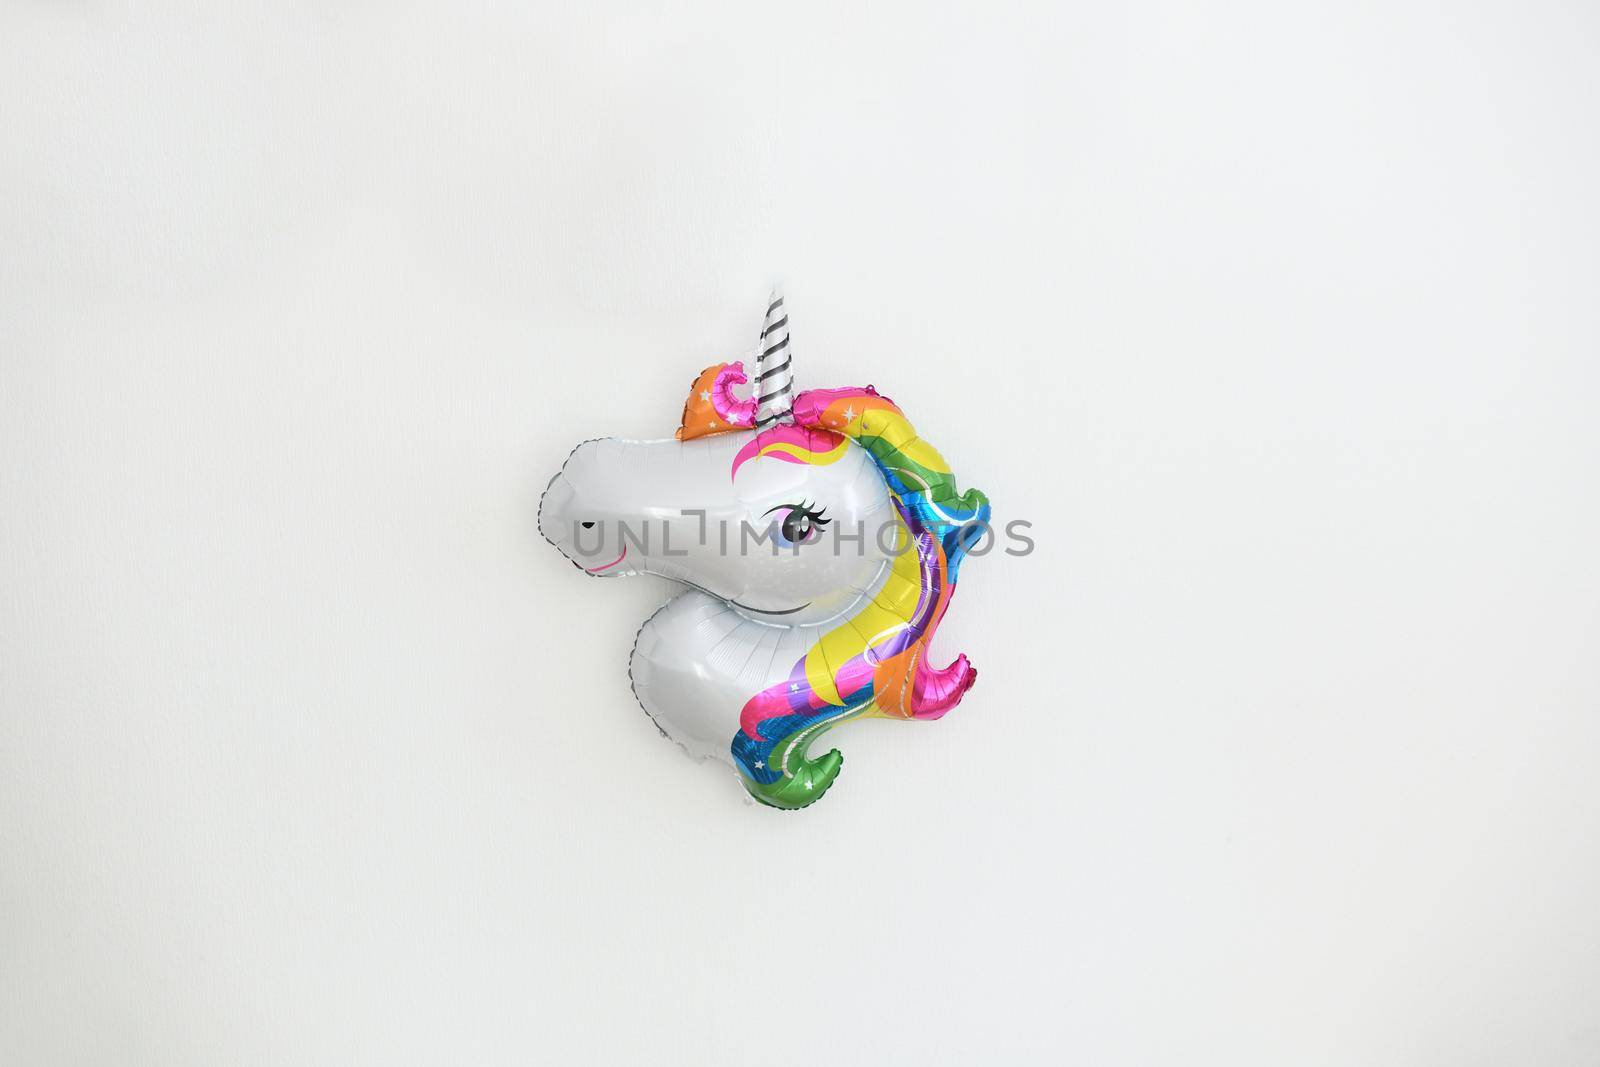 A inflatable unicorn hanging on the wall for birthday decoration